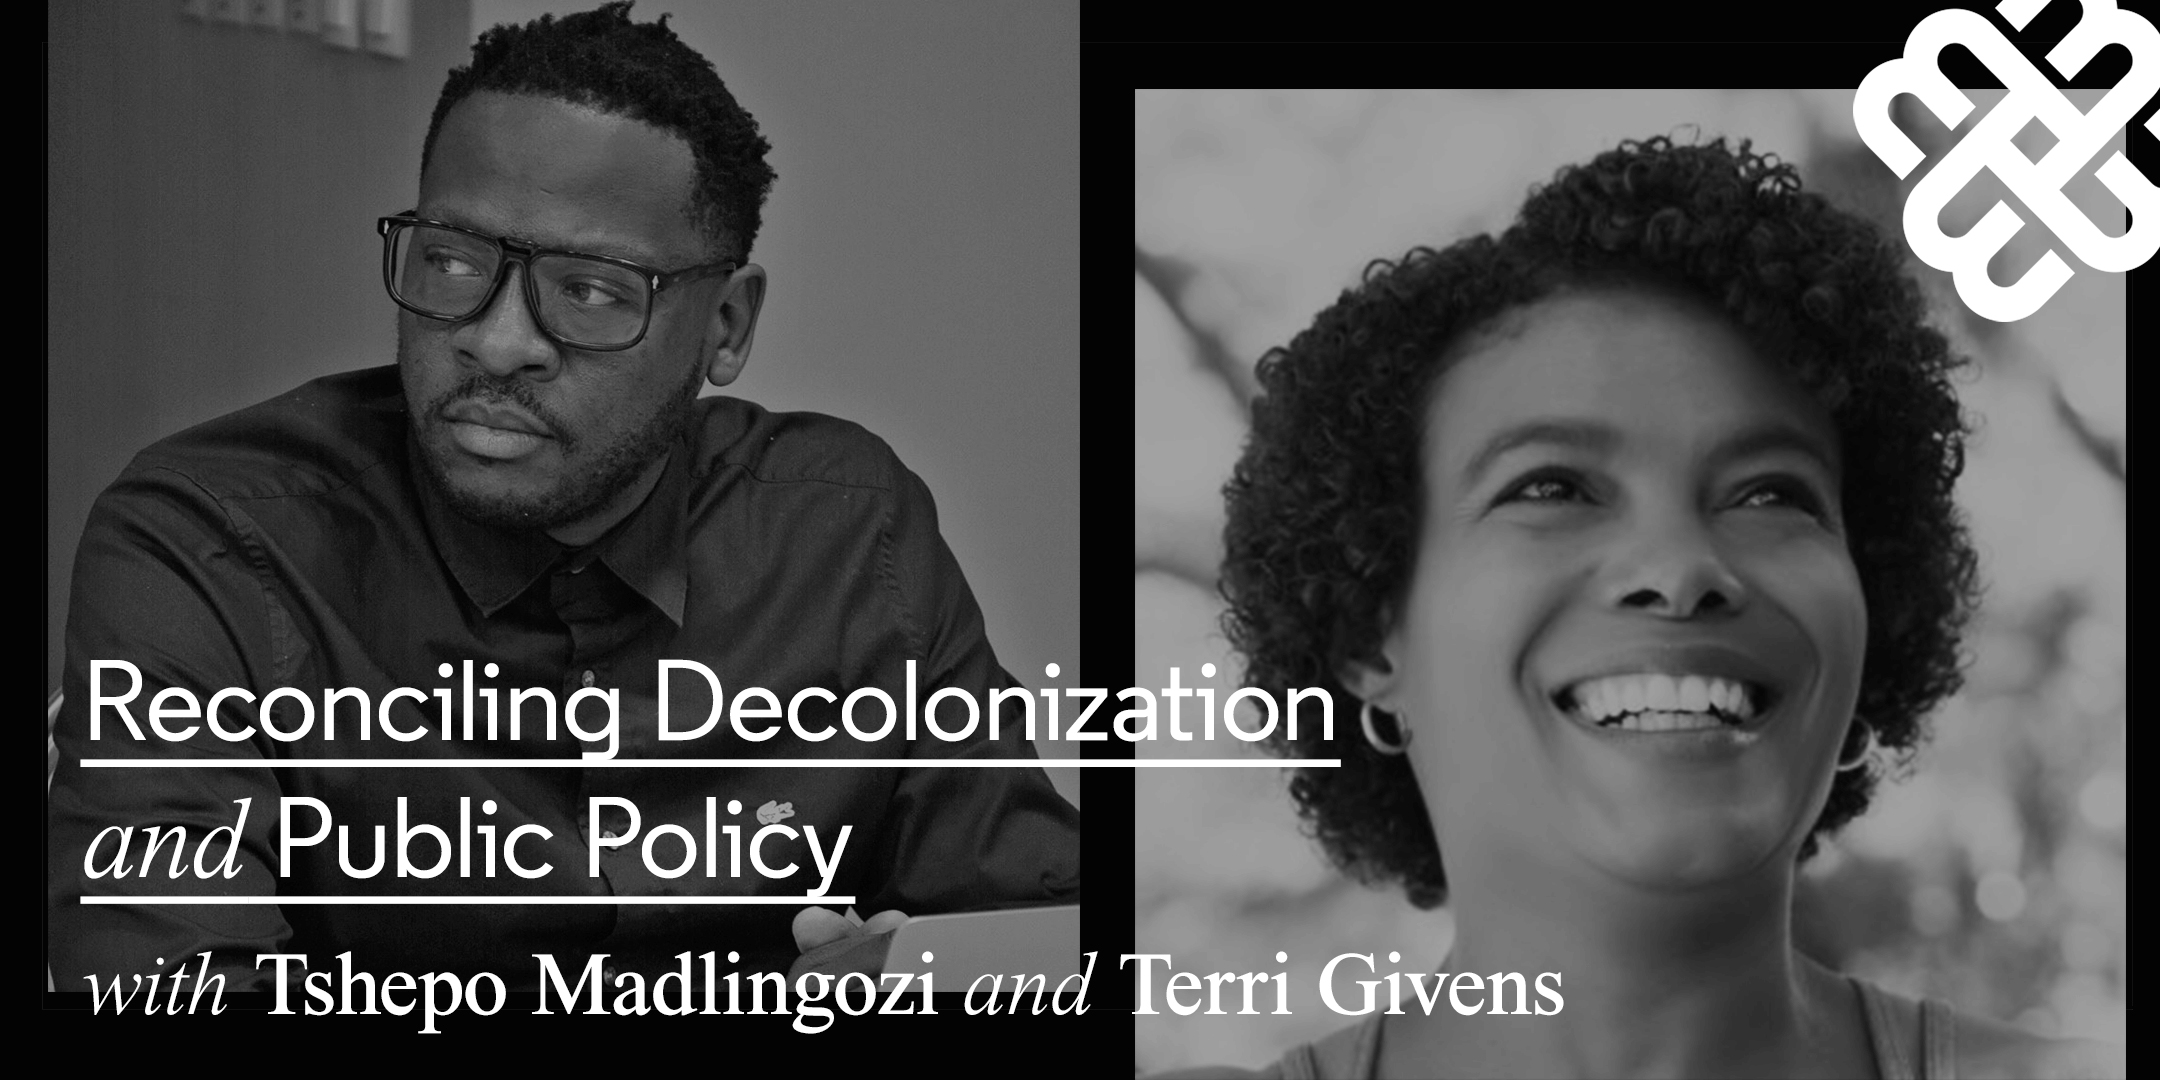 Reconciling Decolonization and Public Policy